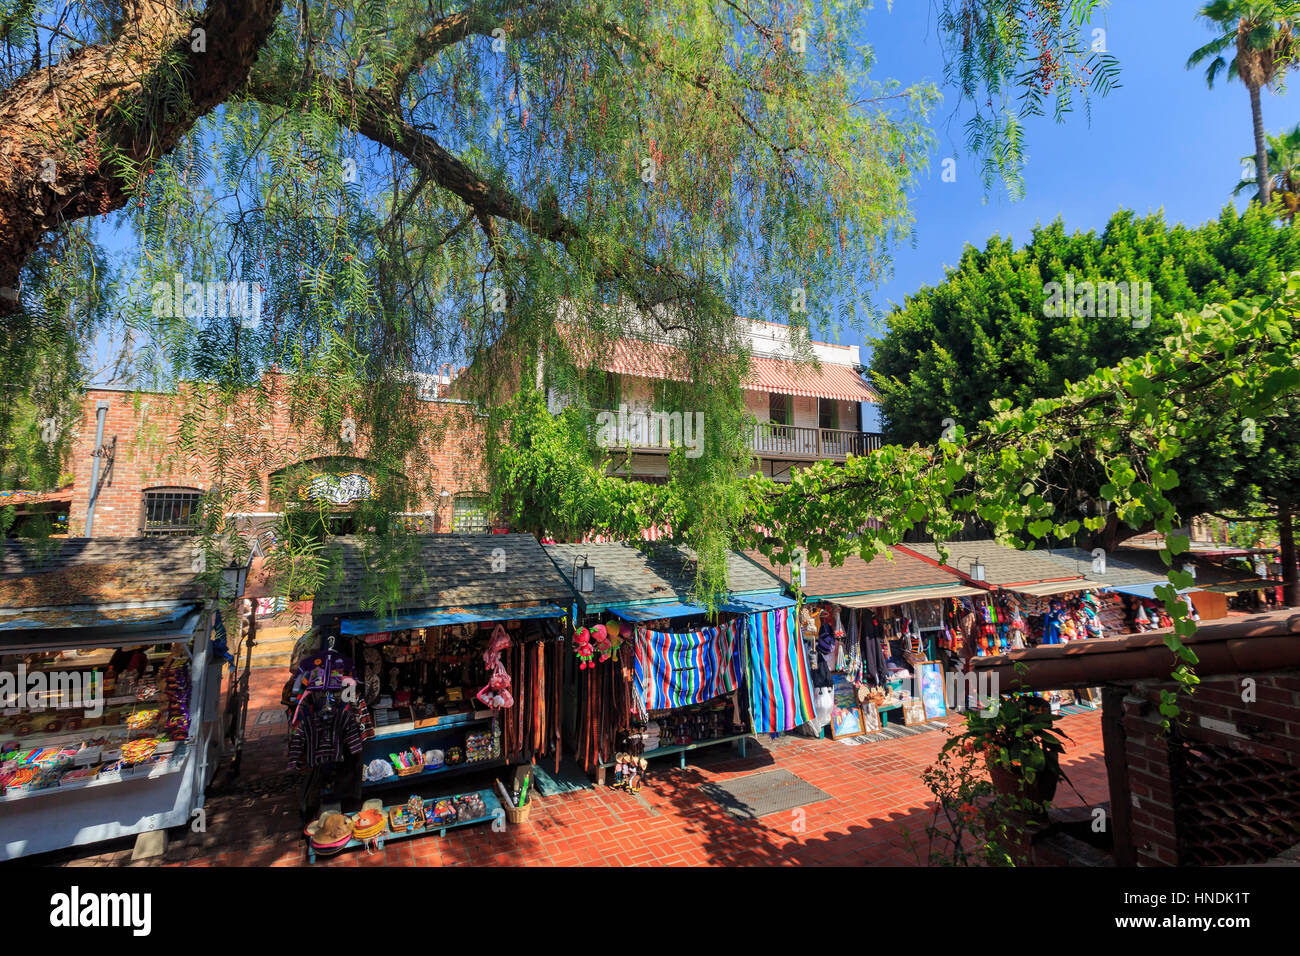 Los Angeles, AUG 23: The famous Olvera Street on AUG 23, 2014 at Los Angeles Stock Photo